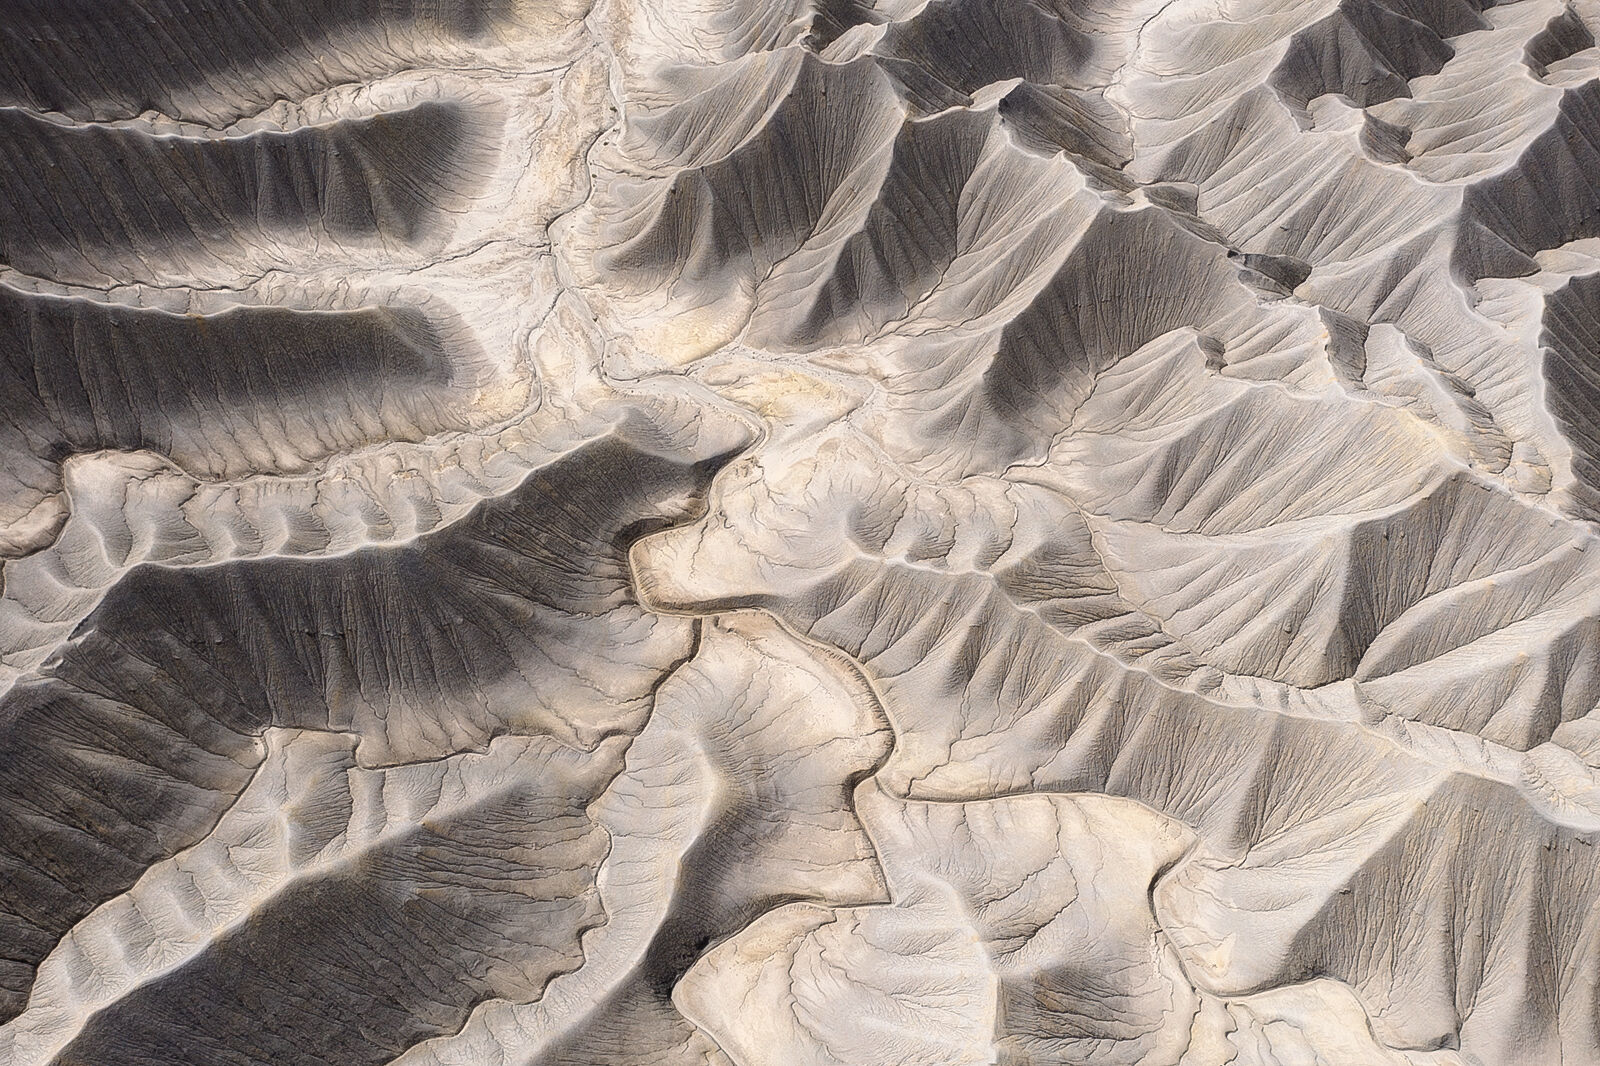 Aerial photograph of silver mountains and badlands